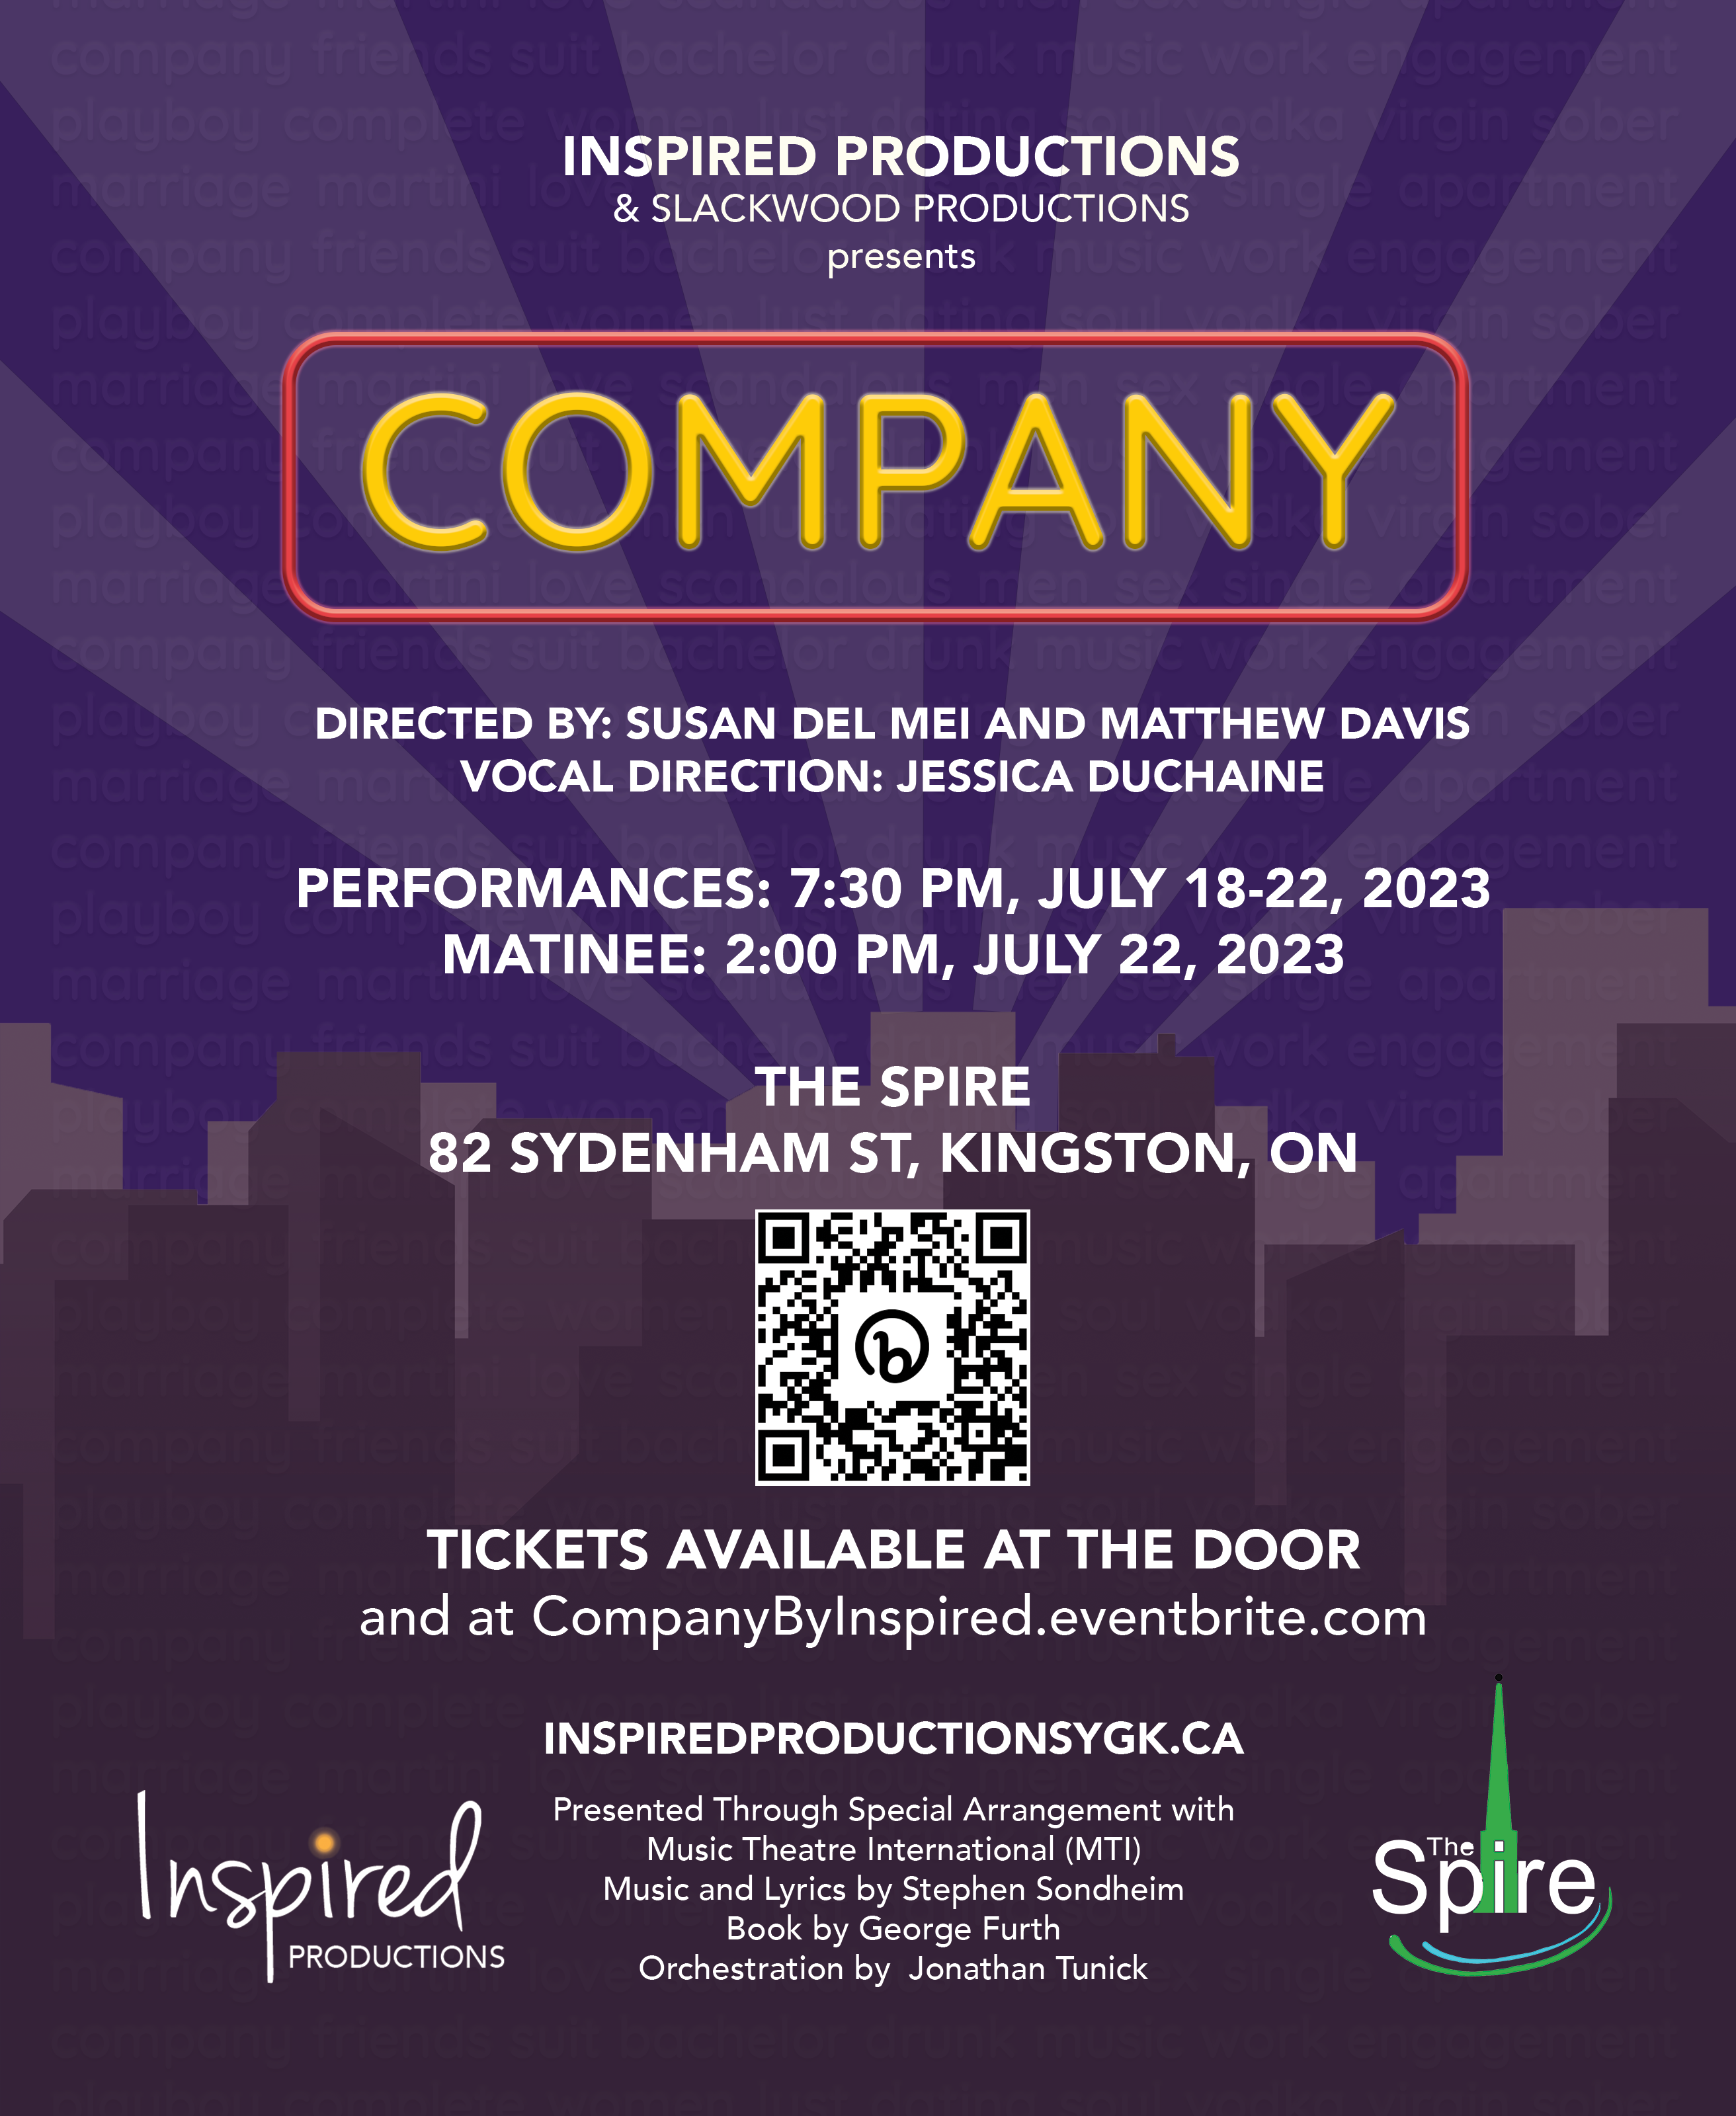 Poster for Inspired Productions' 'Company'. Text reads: ISPIRED PRODUCTIONS 7 SLACKWOOD PRODUCTIONS presents COMPANY DIRECTED BY: SUSAN DEL MEI AND MATTHEW DAVIS VOCAL DIRECTION: JESSICA DUCHAINE PERFORMANCES: 7:30 PM, JULY 18-22, 2023 MATINEE: 2:00 PM, JULY 22, 2023 THE SPIRE 82 SYDENHAM ST, KINGSTON, ON TICKETS AVAILABLE AT THE DOOR and at CompanyByInspired.eventbrite.com INSPIREDPRODUCTIONSYGK.CA Presented Through Special Arrangement with Music Theatre International (MTI) Music and Lyrics by Stephen Sondheim Book by George Furth Orchestration by Jonathan Tunick